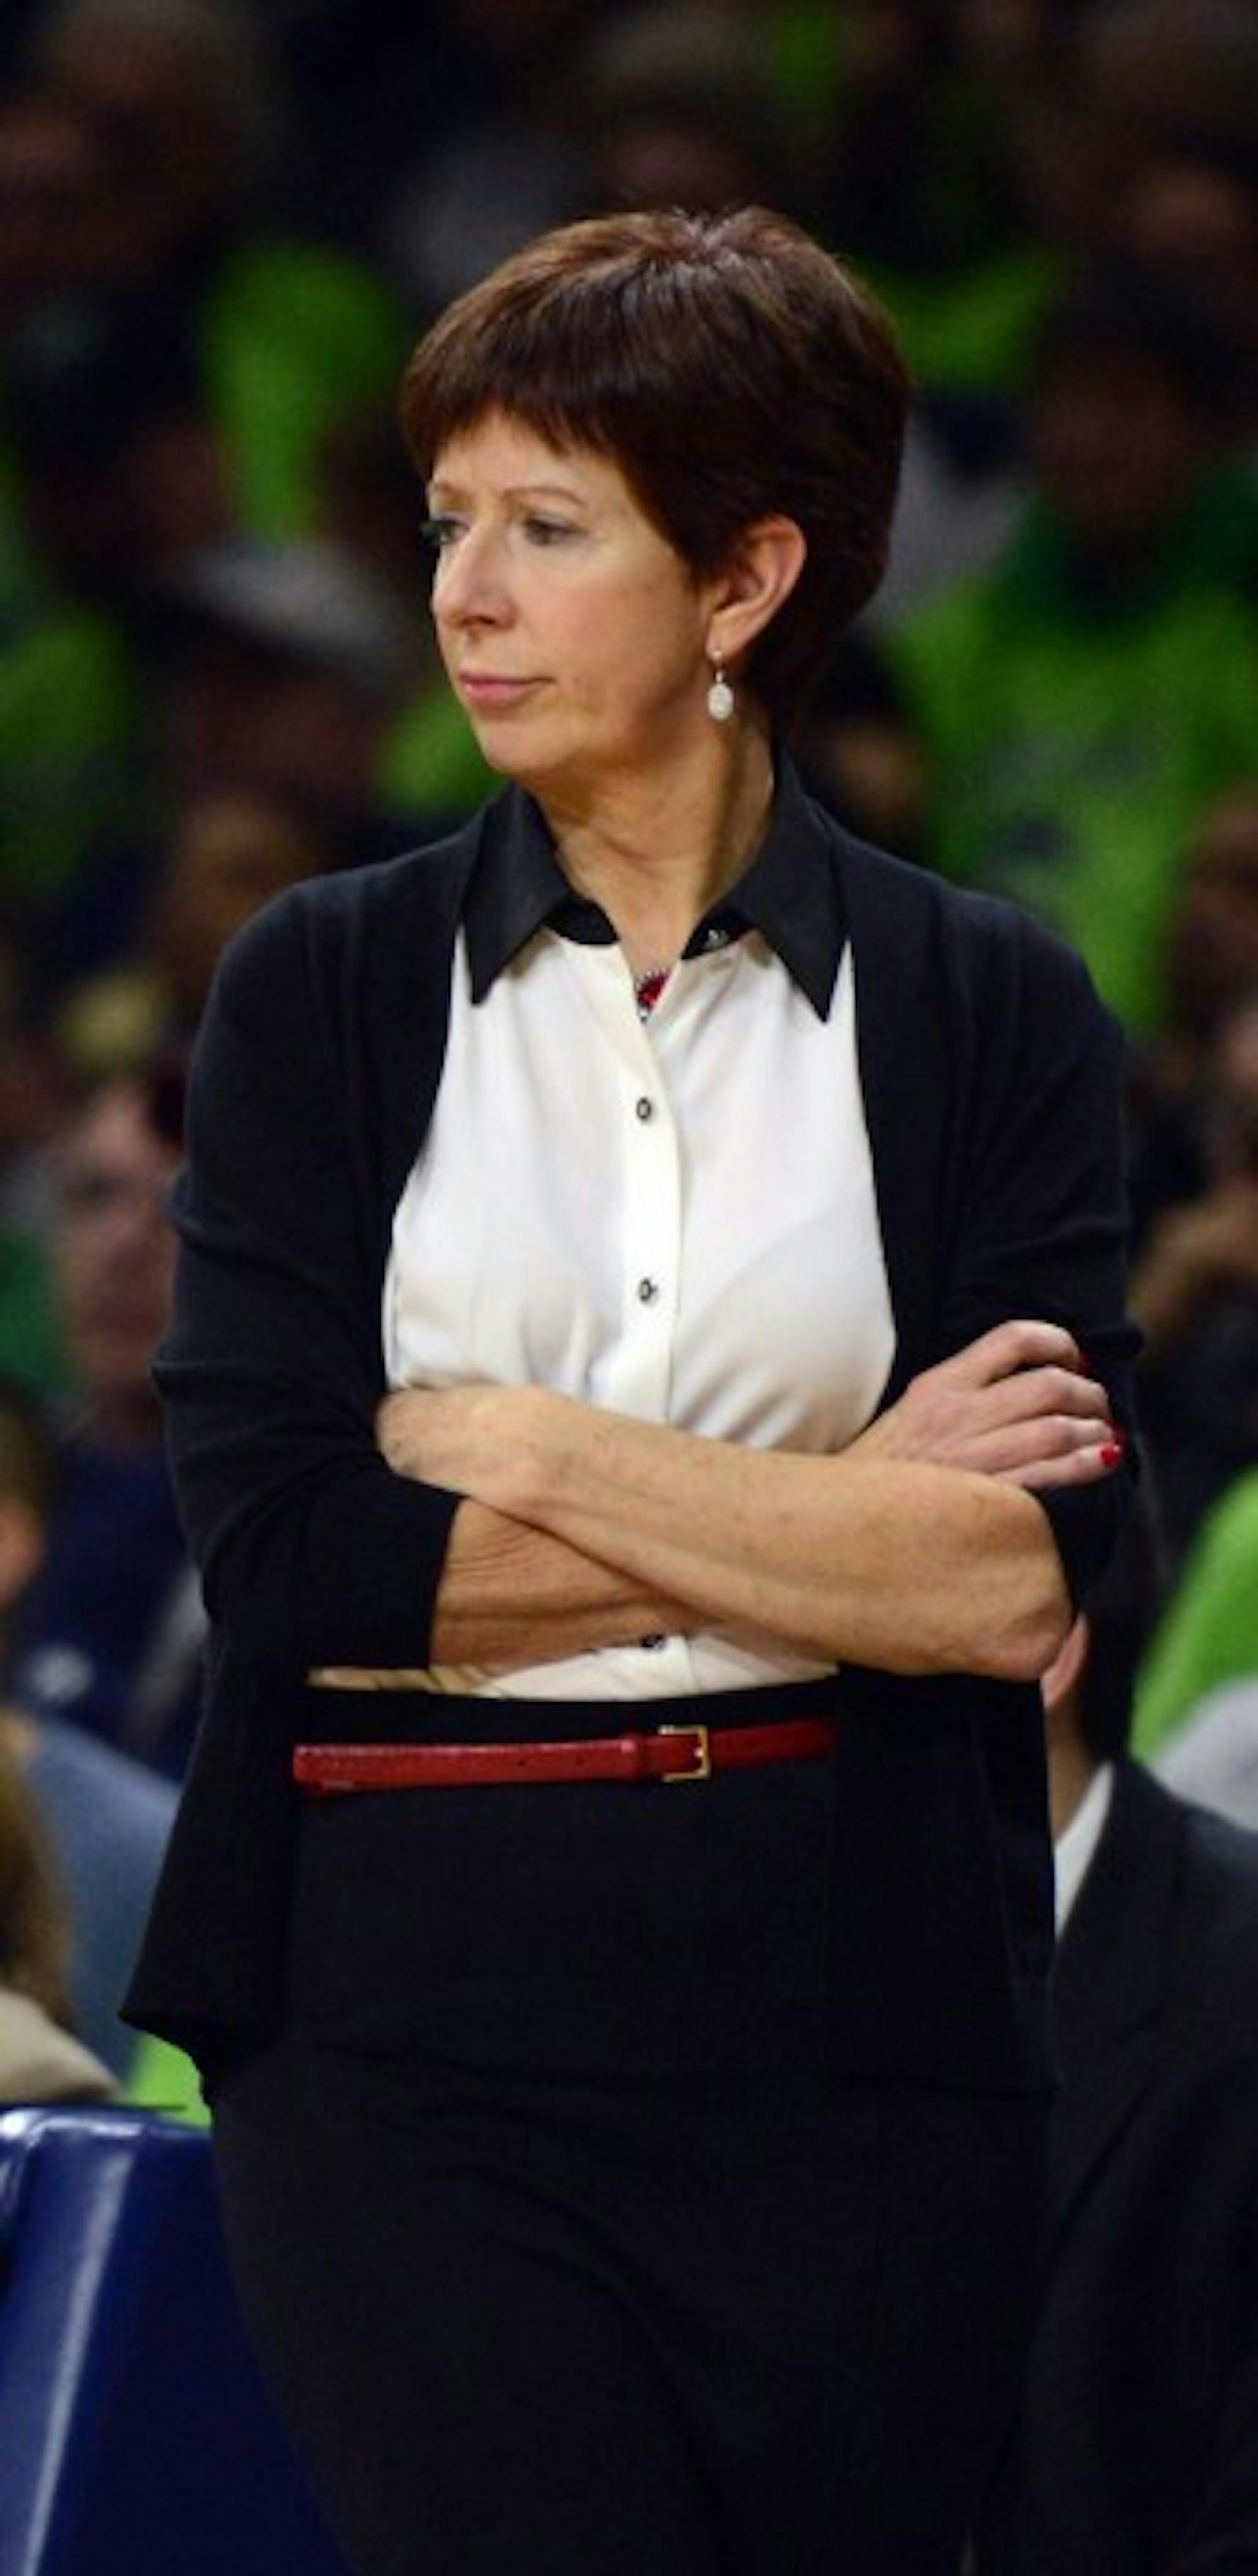 Irish coach Muffet McGraw looks on during Notre Dame's 76-58 loss to Connecticut on Saturday.